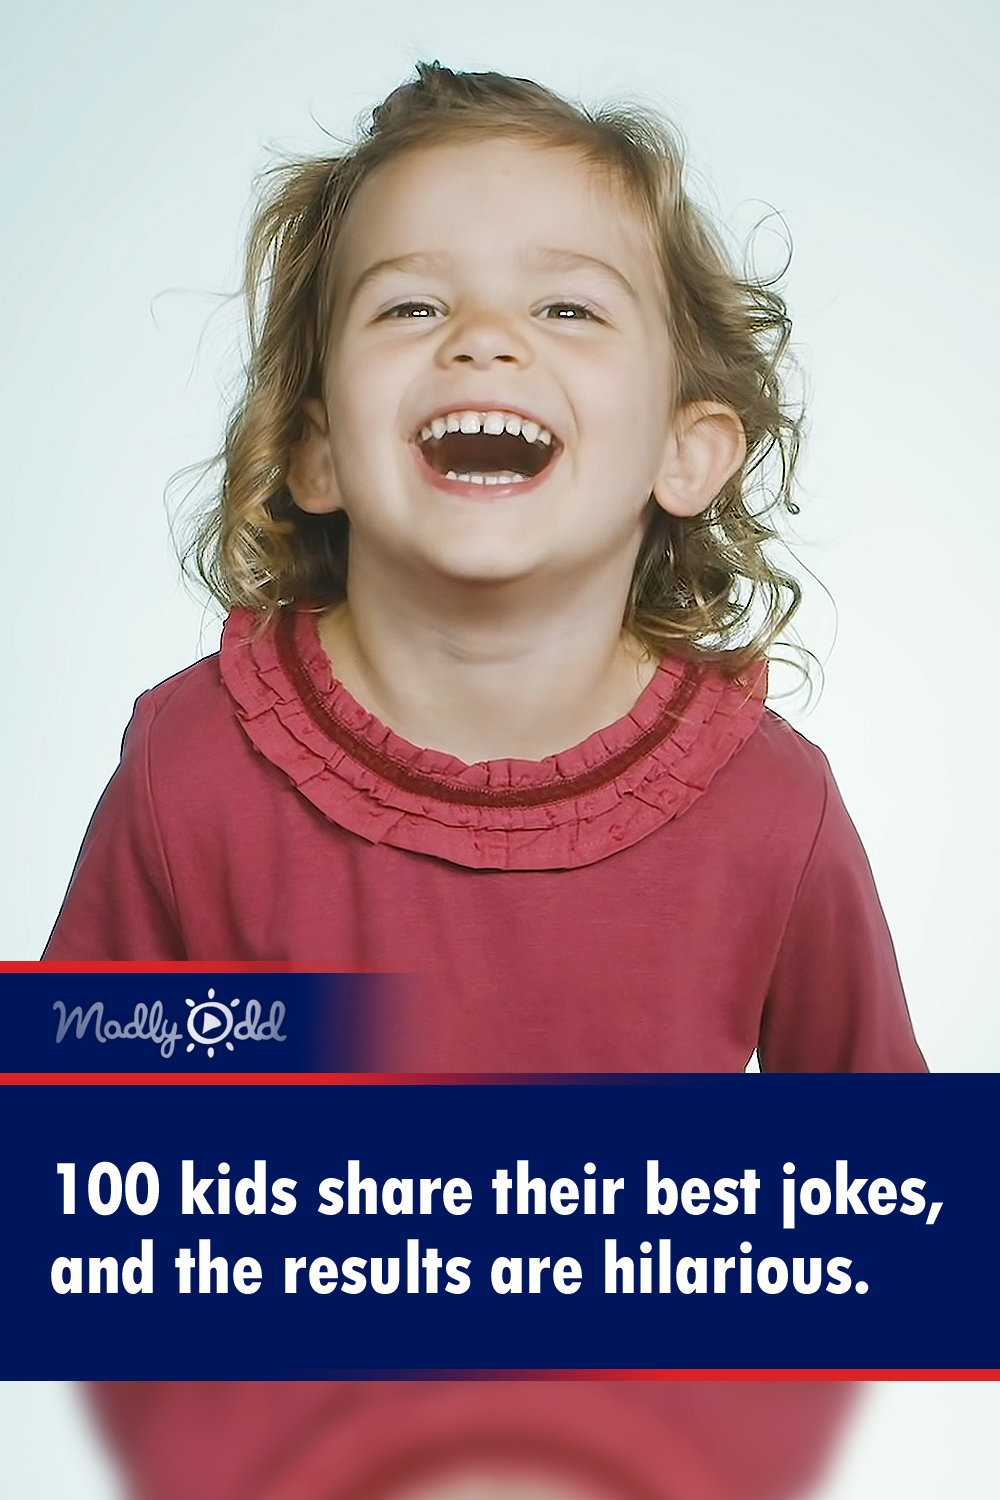 100 kids share their best jokes, and the results are hilarious